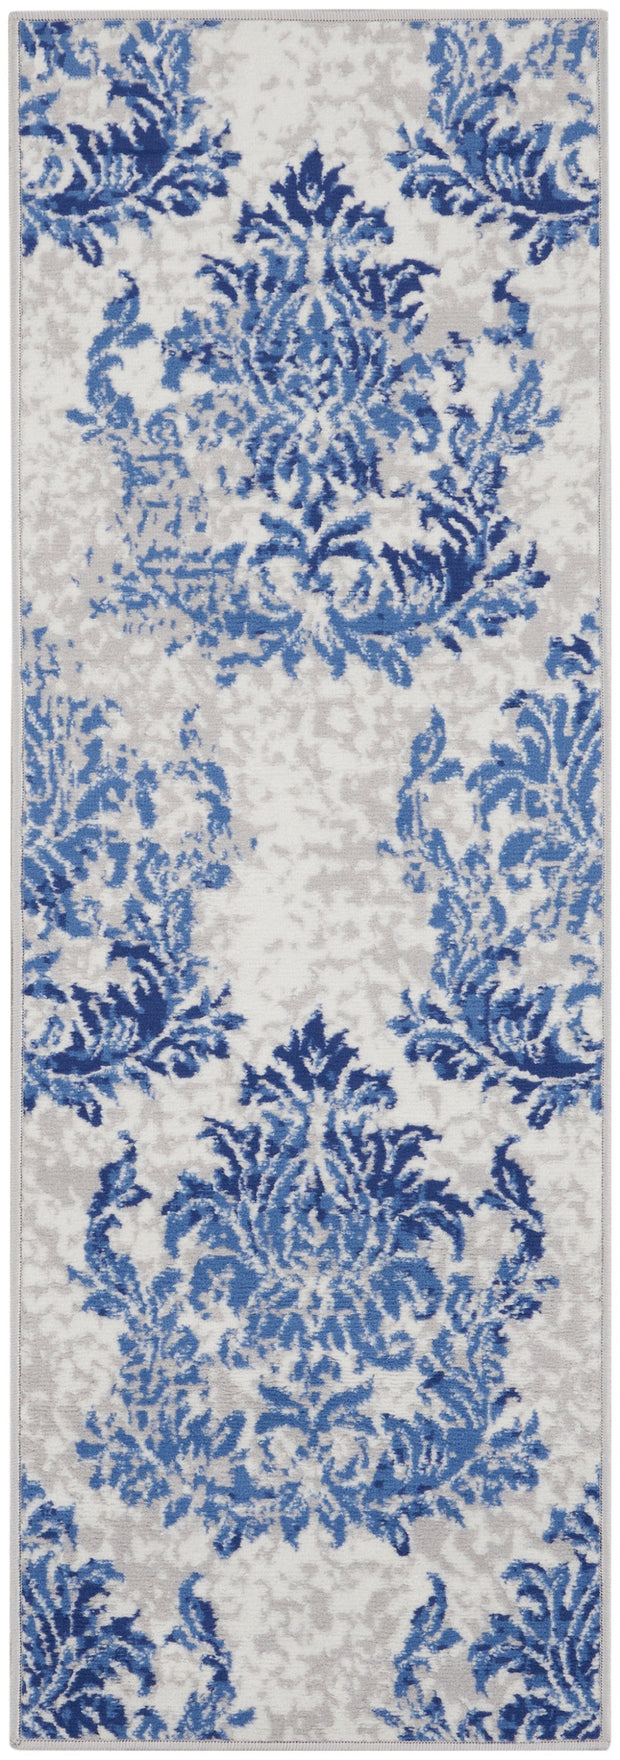 whimsicle ivory navy rug by nourison 99446833532 redo 3